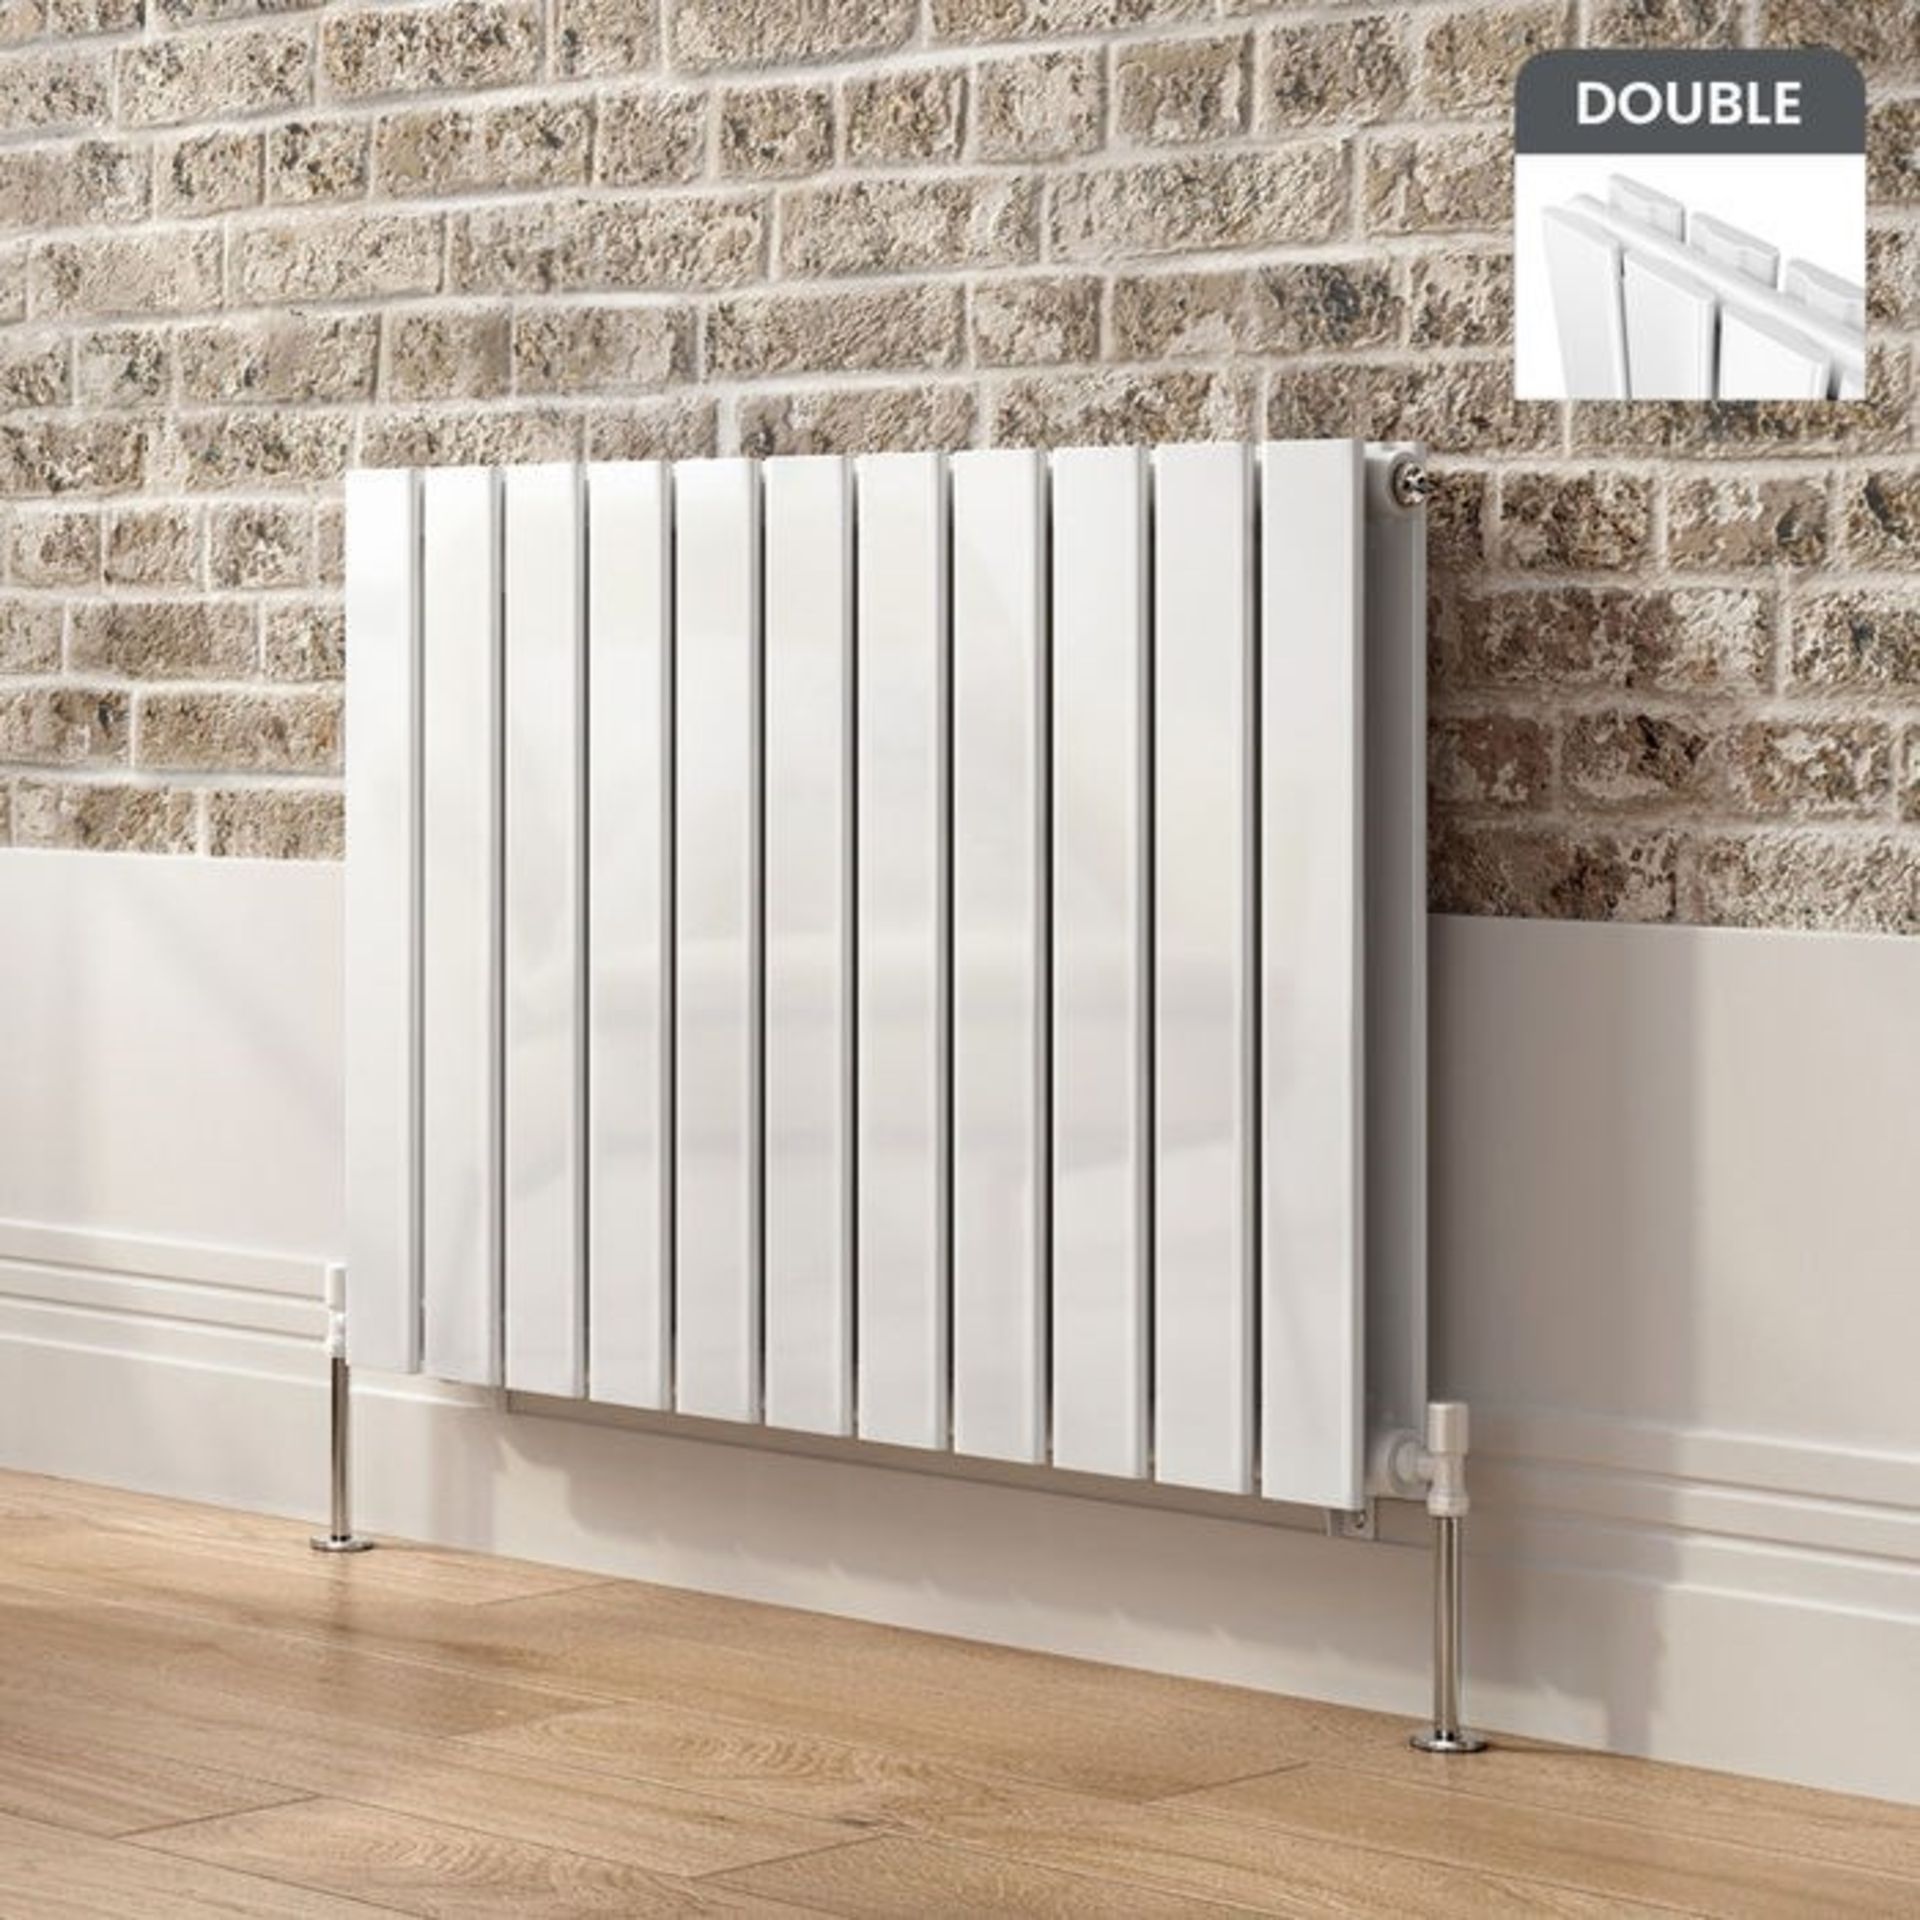 600x830mm Gloss White Double Flat Panel Horizontal Radiator. RRP £474.99.RC221.Made with high...